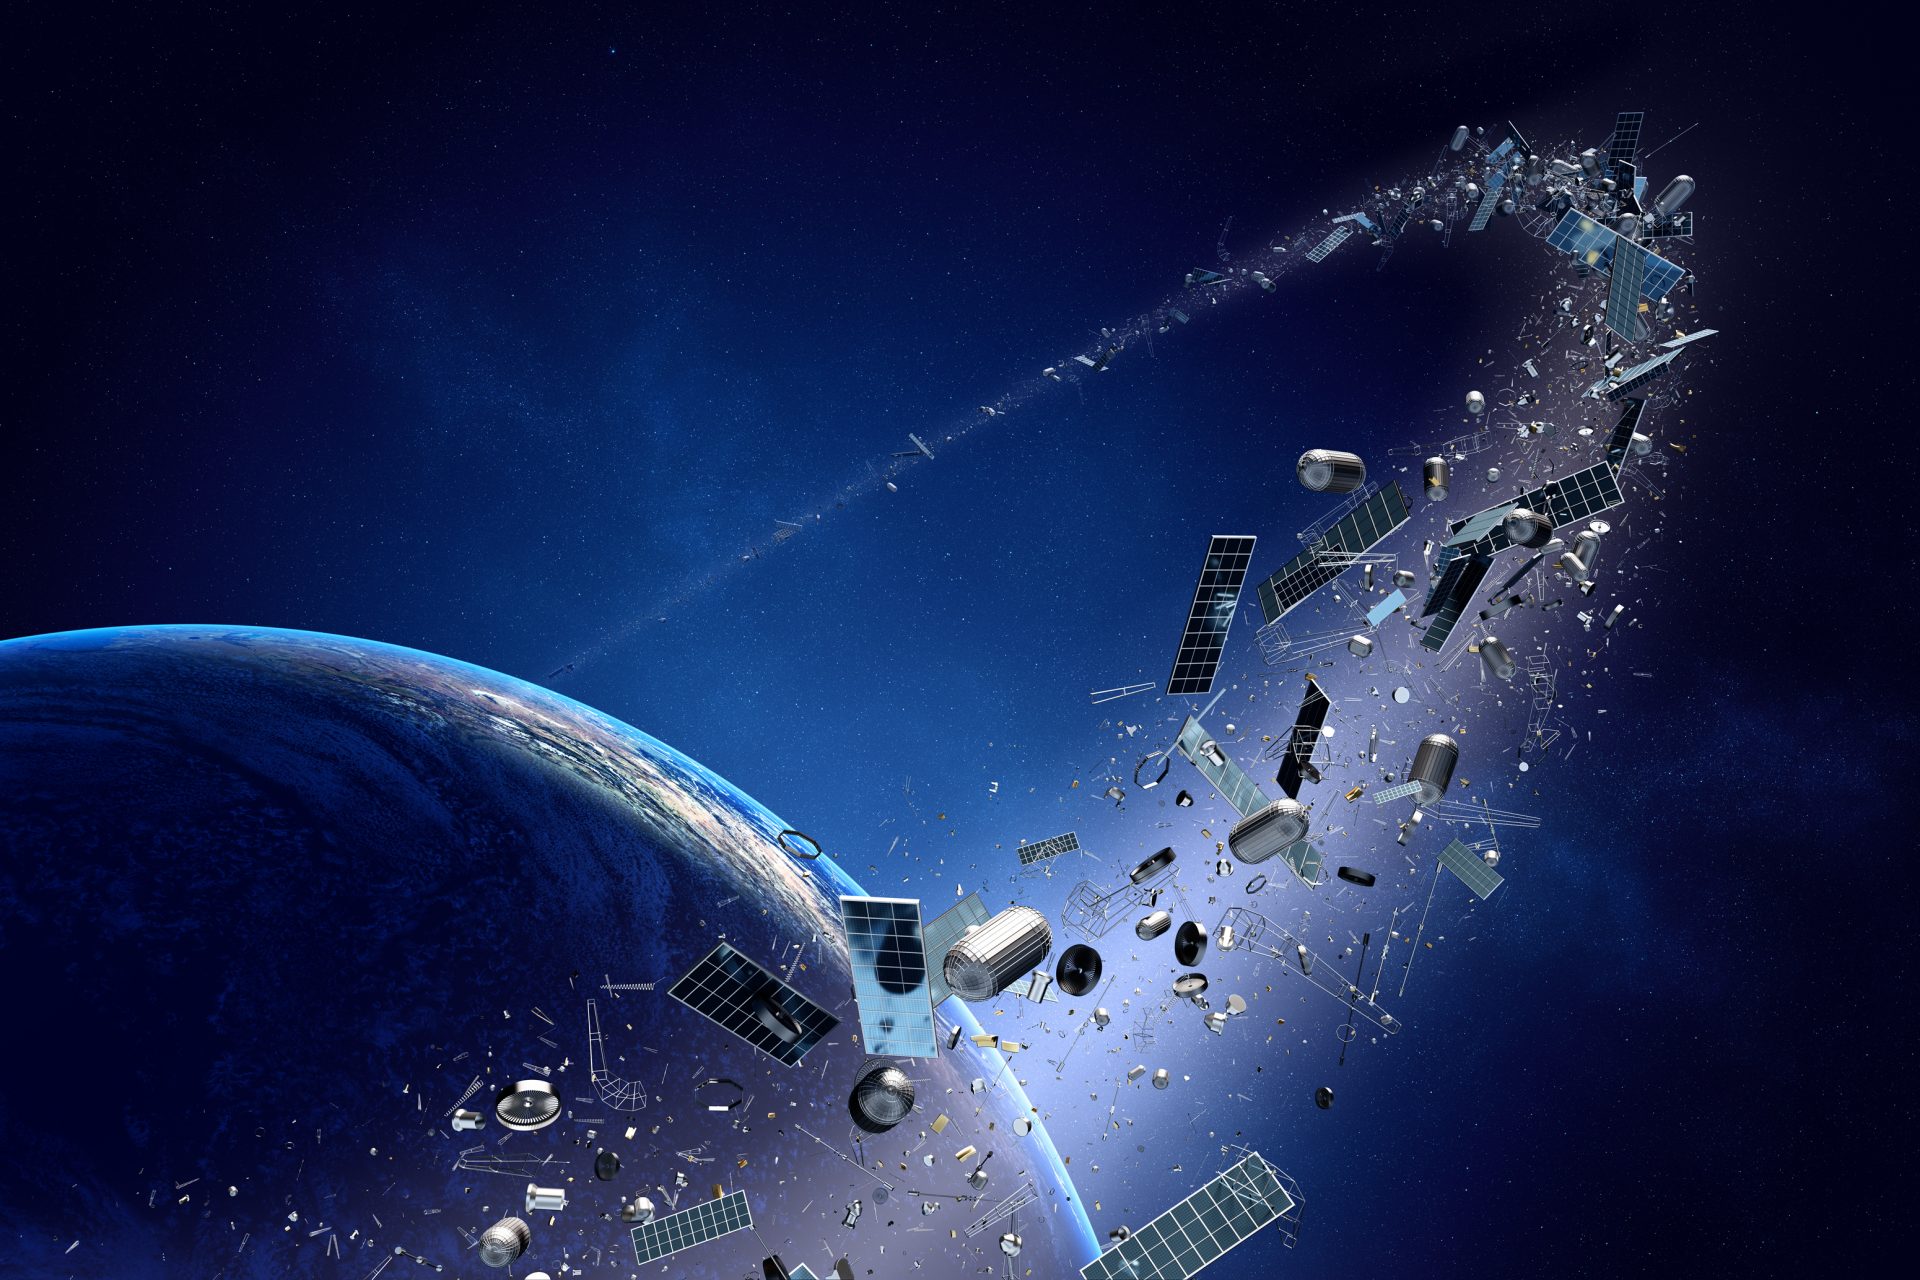 Voice junk: Astronomers misfortune as inside of most firms push ahead with satellite launches